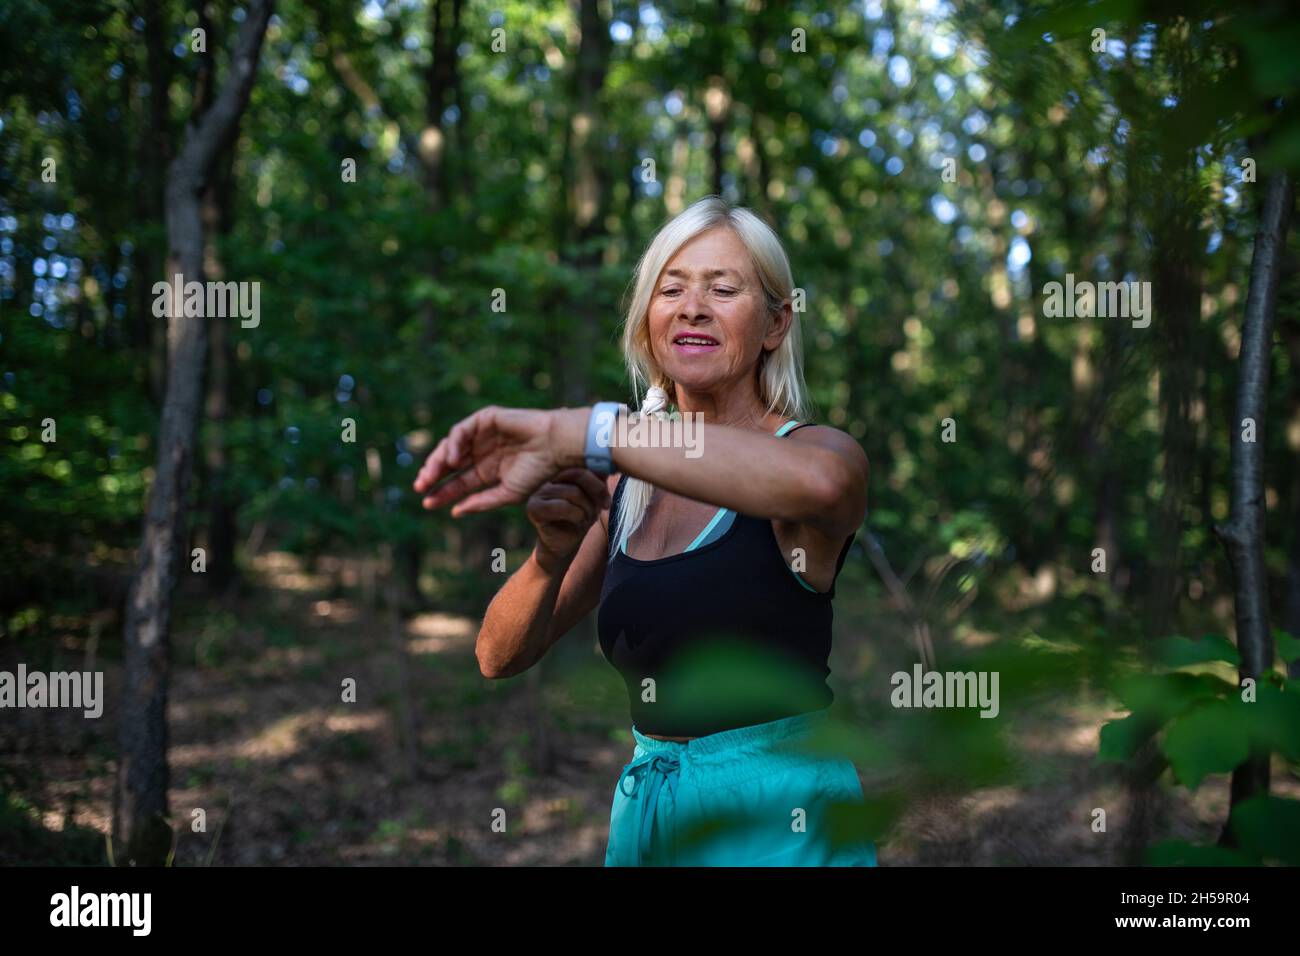 Portrait of active senior woman runner standing outdoors in forest, setting smartwatch. Stock Photo